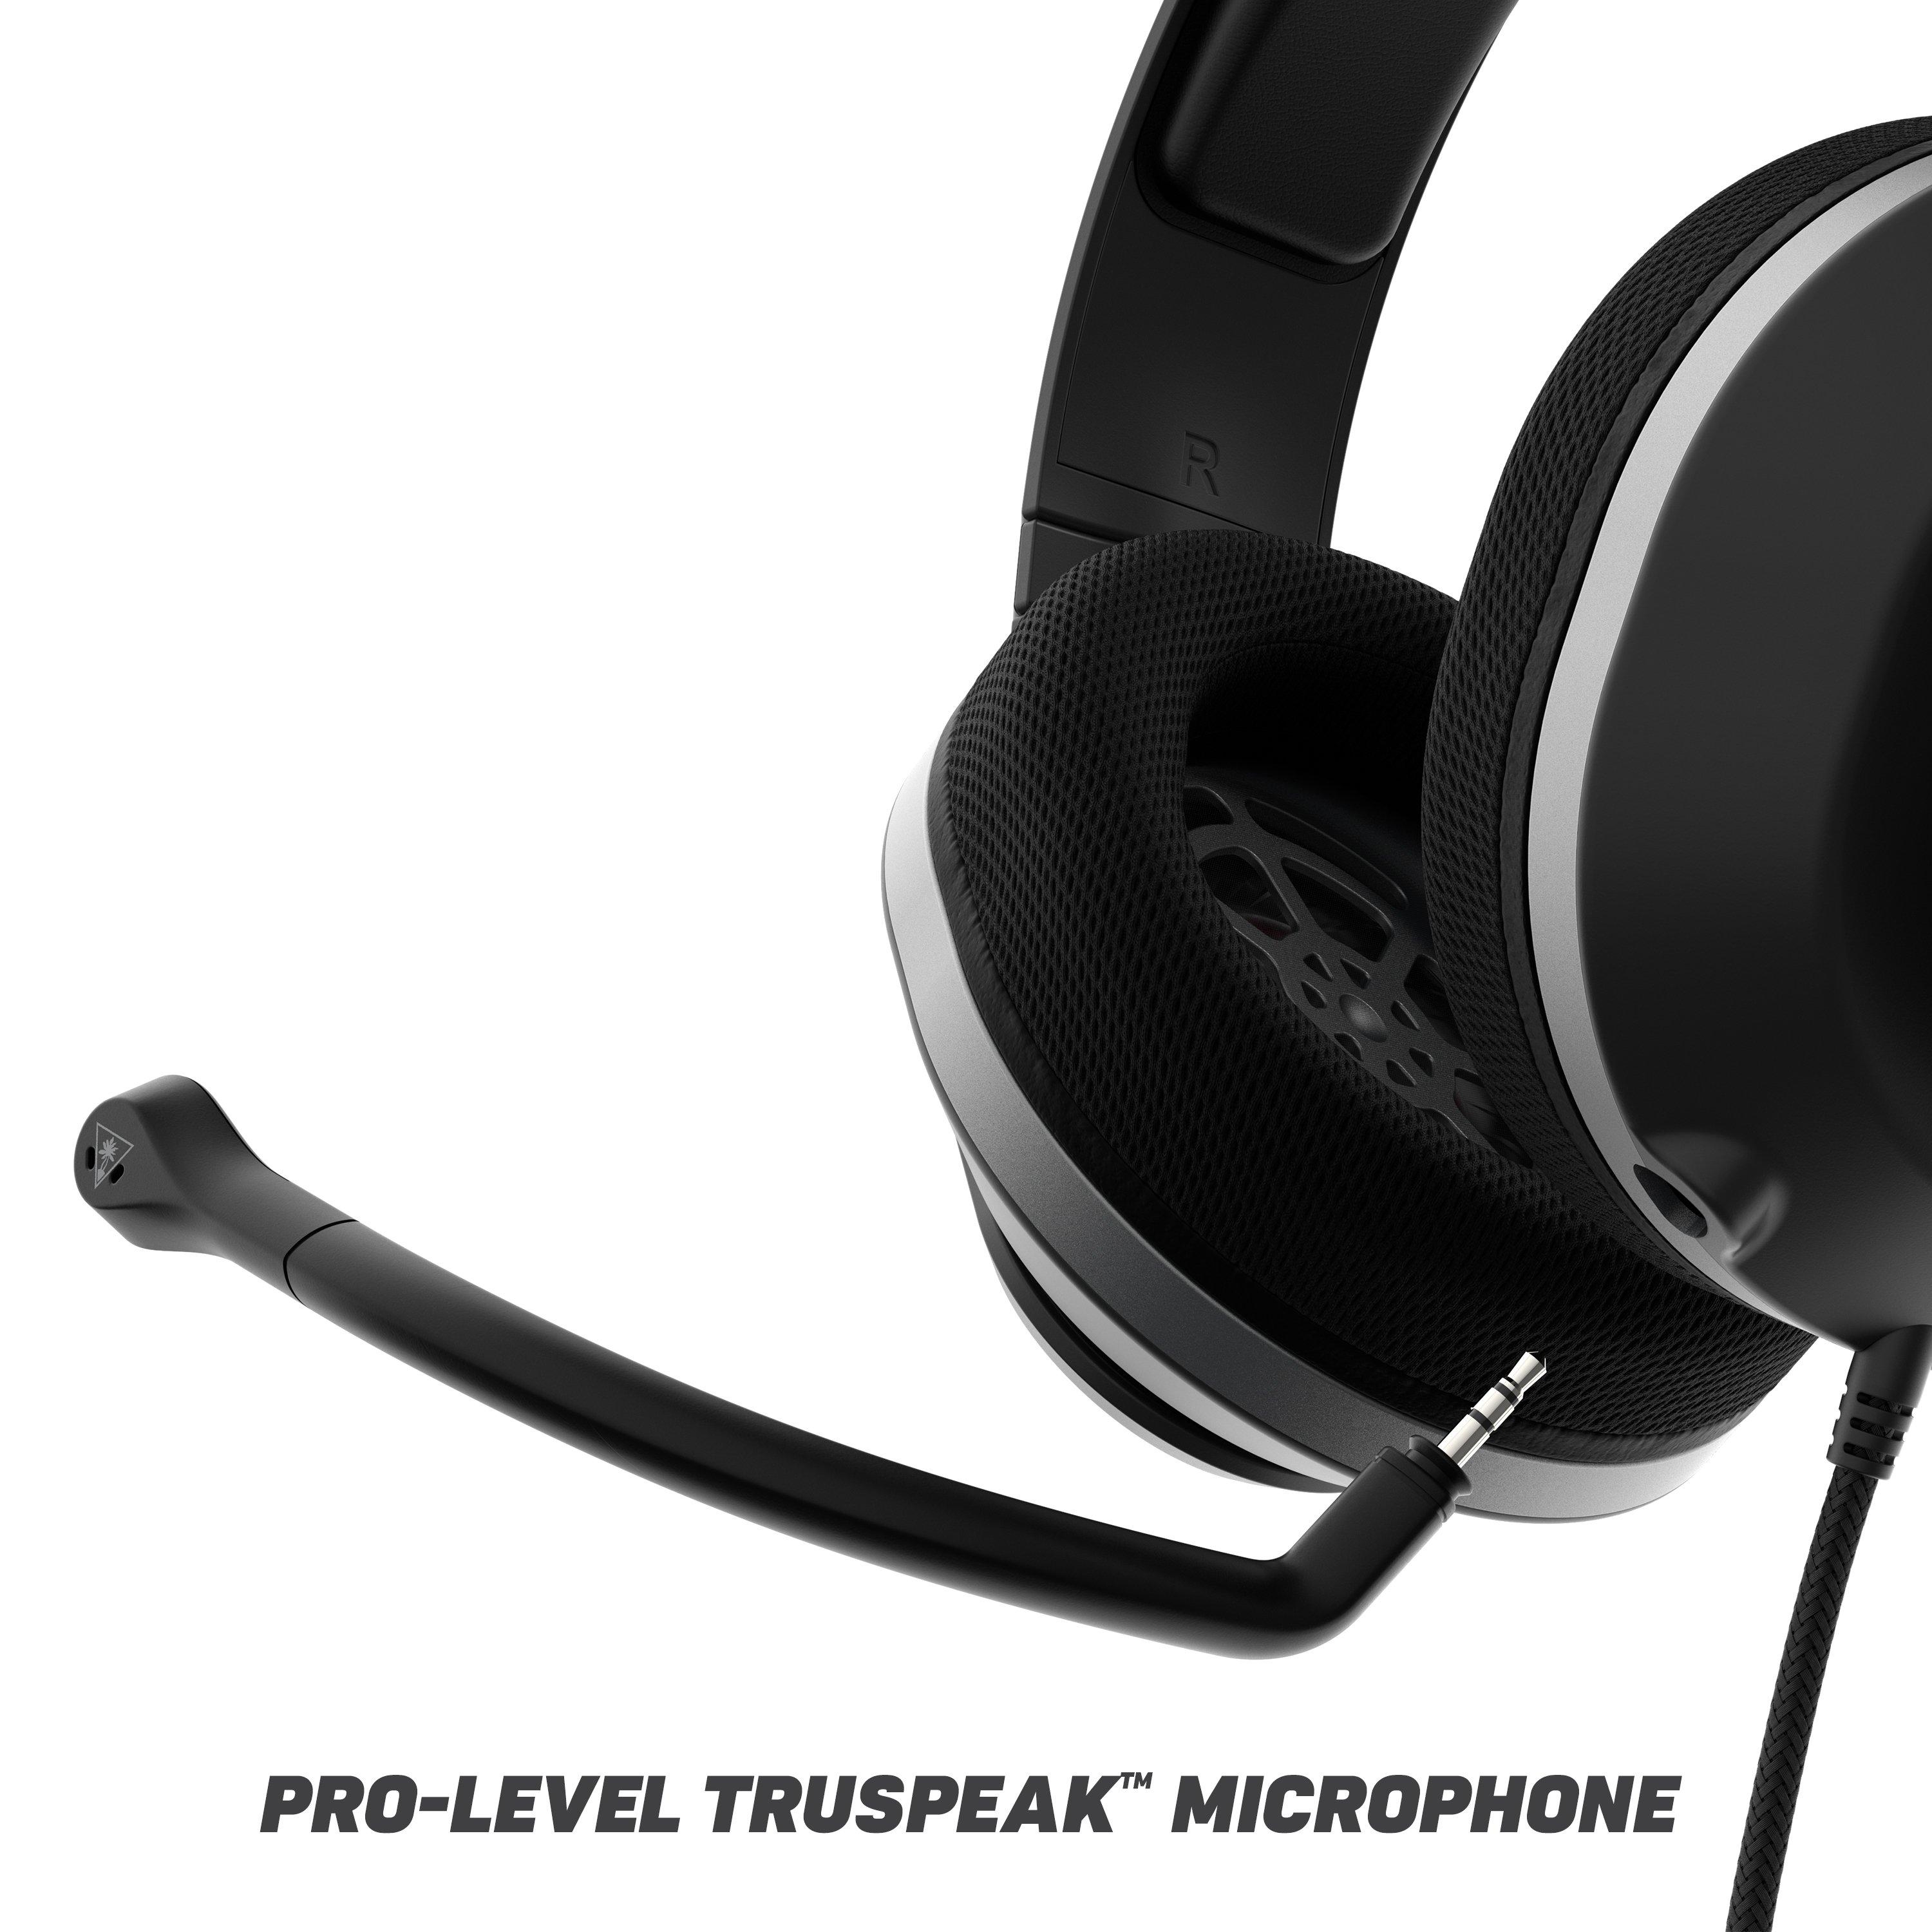 Turtle Beach Recon 500 Wired Gaming Headset Universal